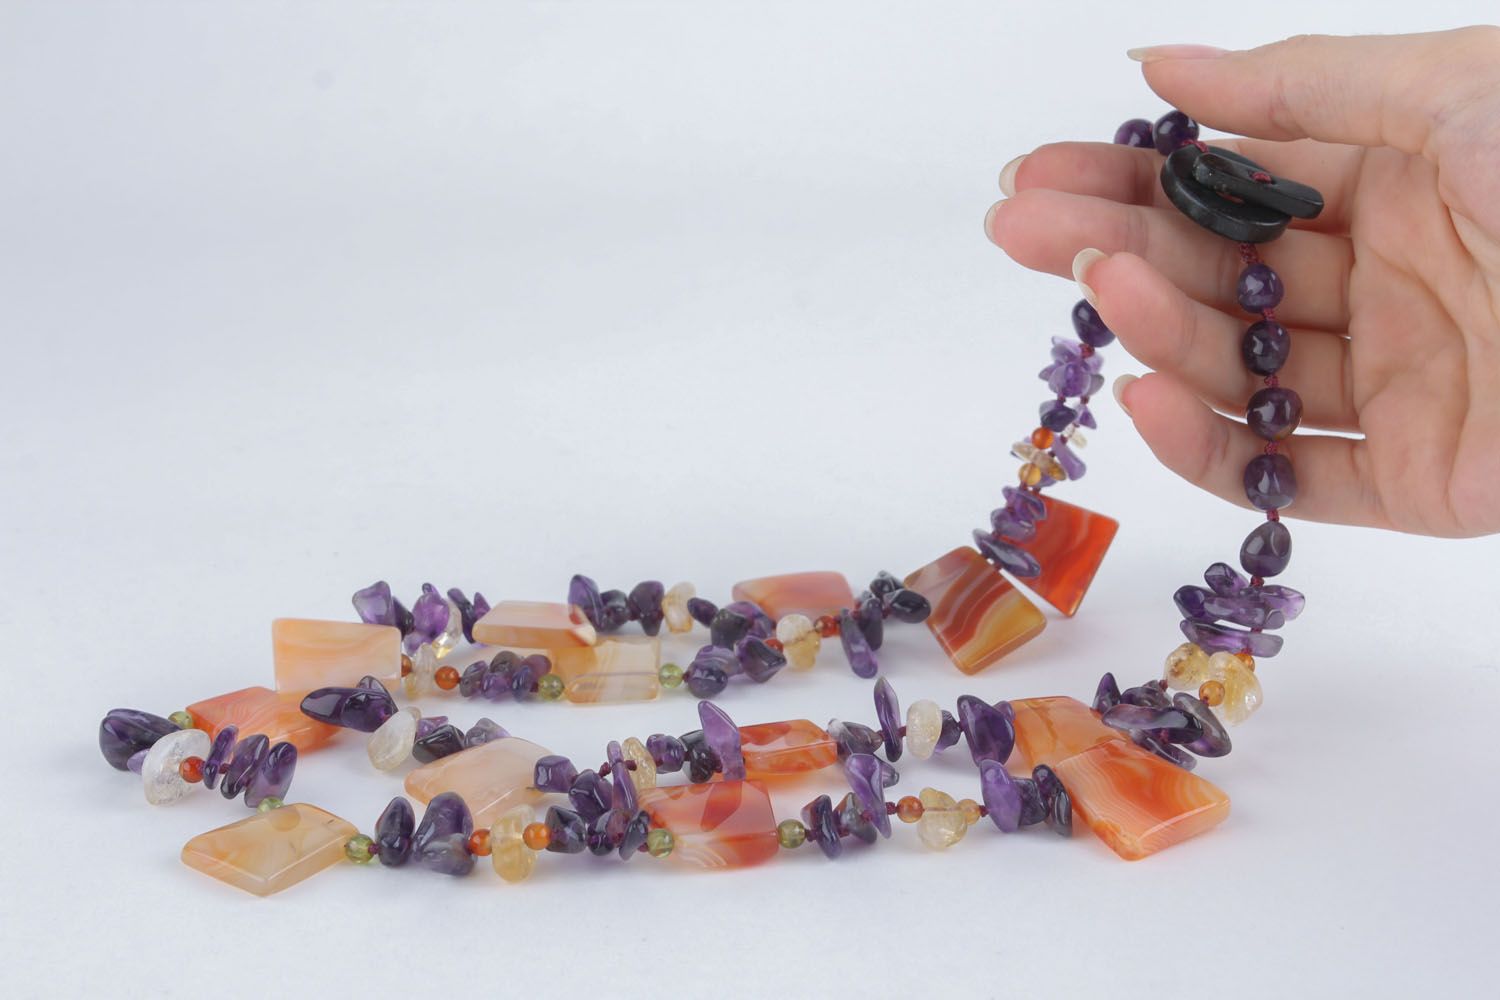 Necklace with natural stones photo 5